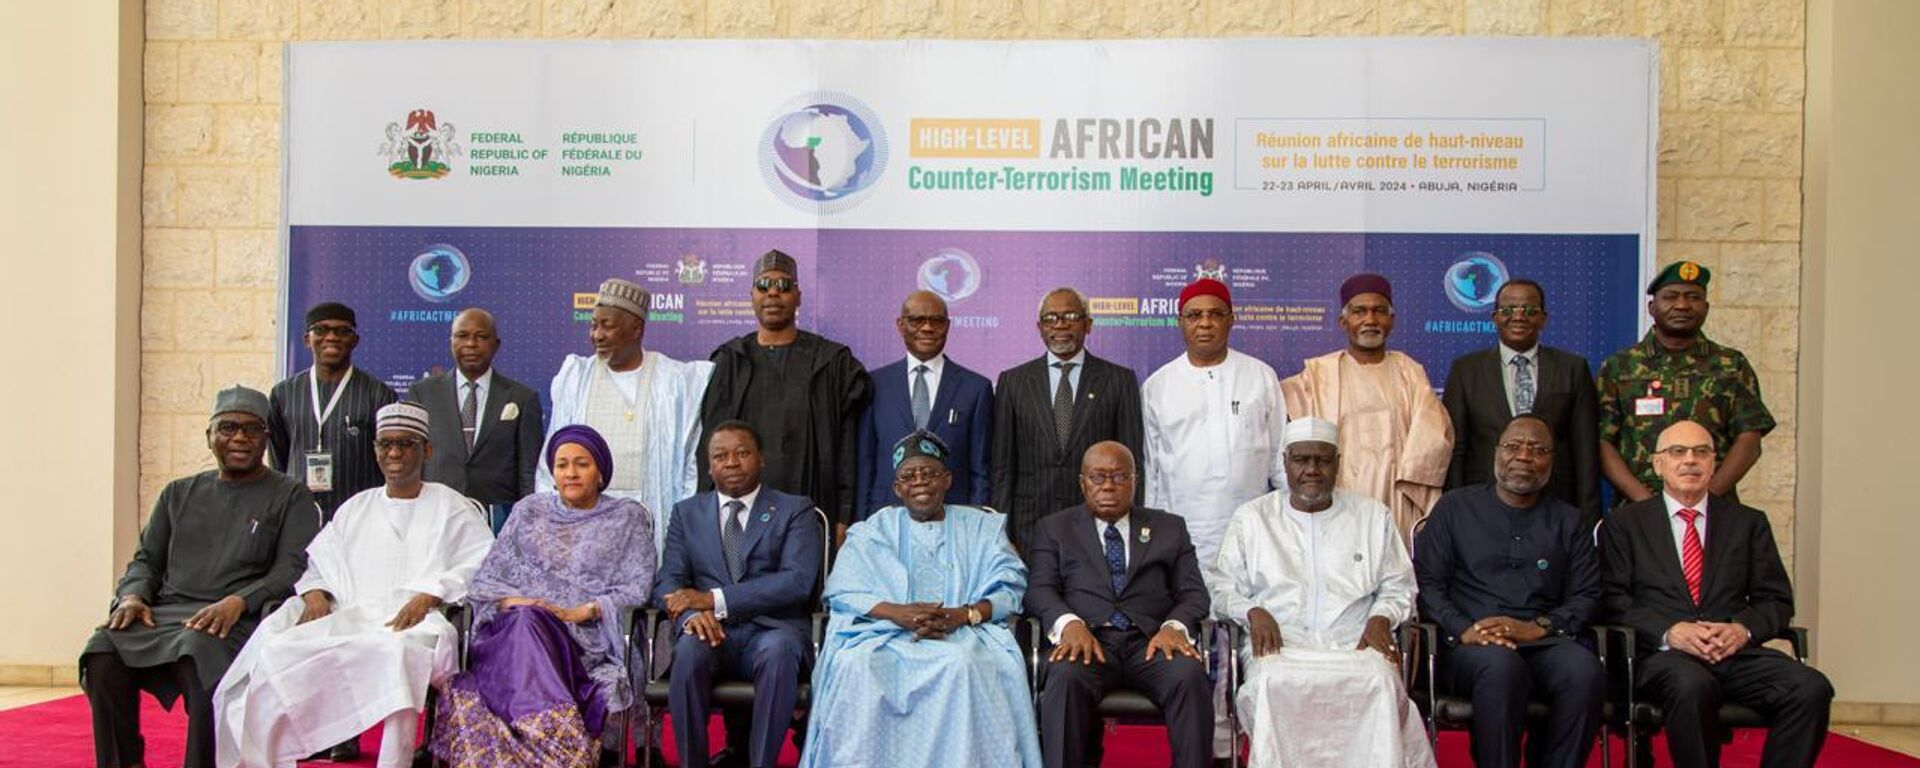 High-level meeting on counter-terrorism in Abuja on April, 22, 2024. - Sputnik Africa, 1920, 22.04.2024